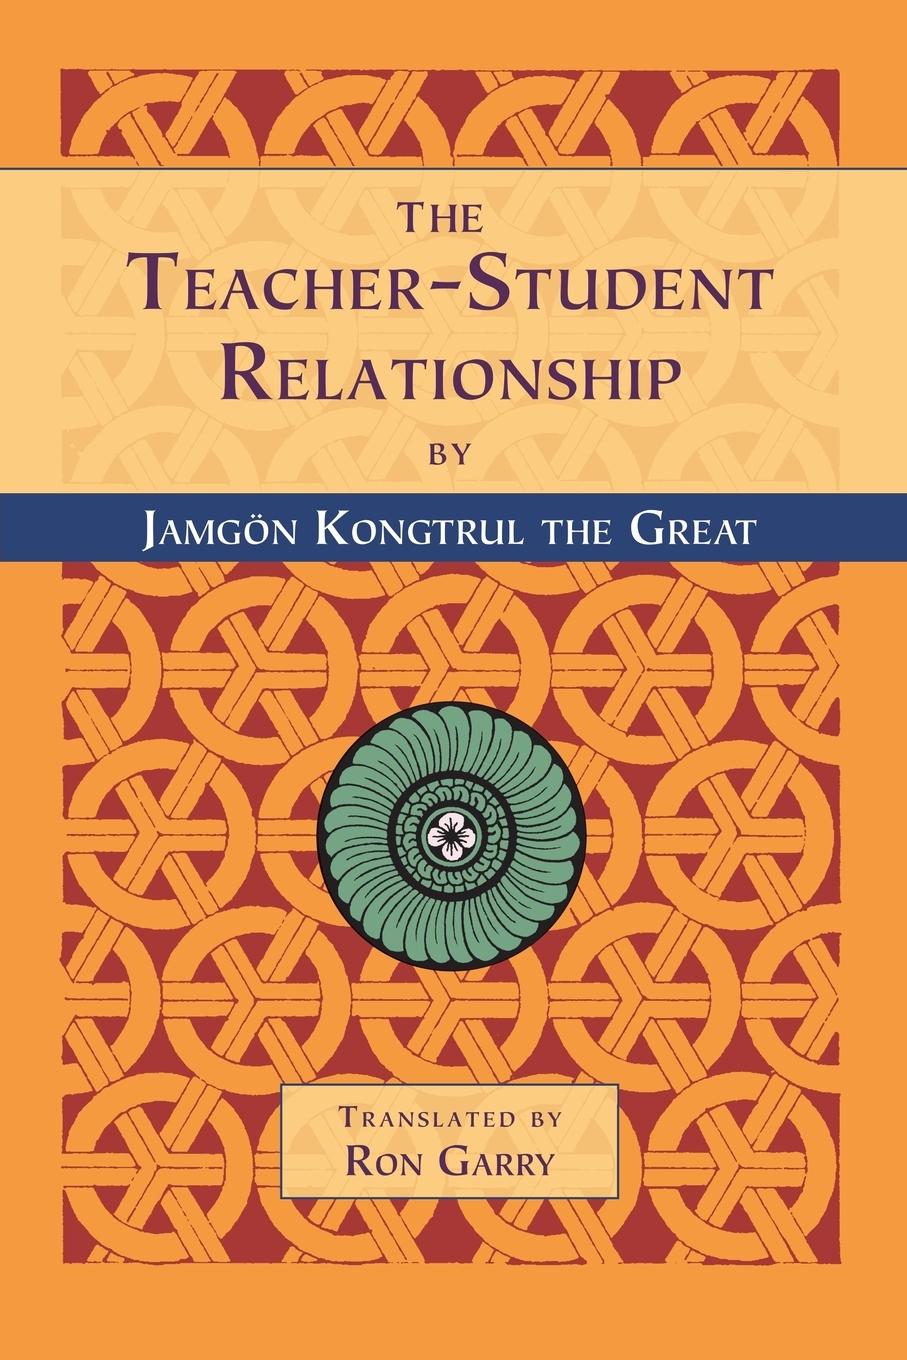 The Teacher-Student Relationship - Jamgon Kongtrul the Great